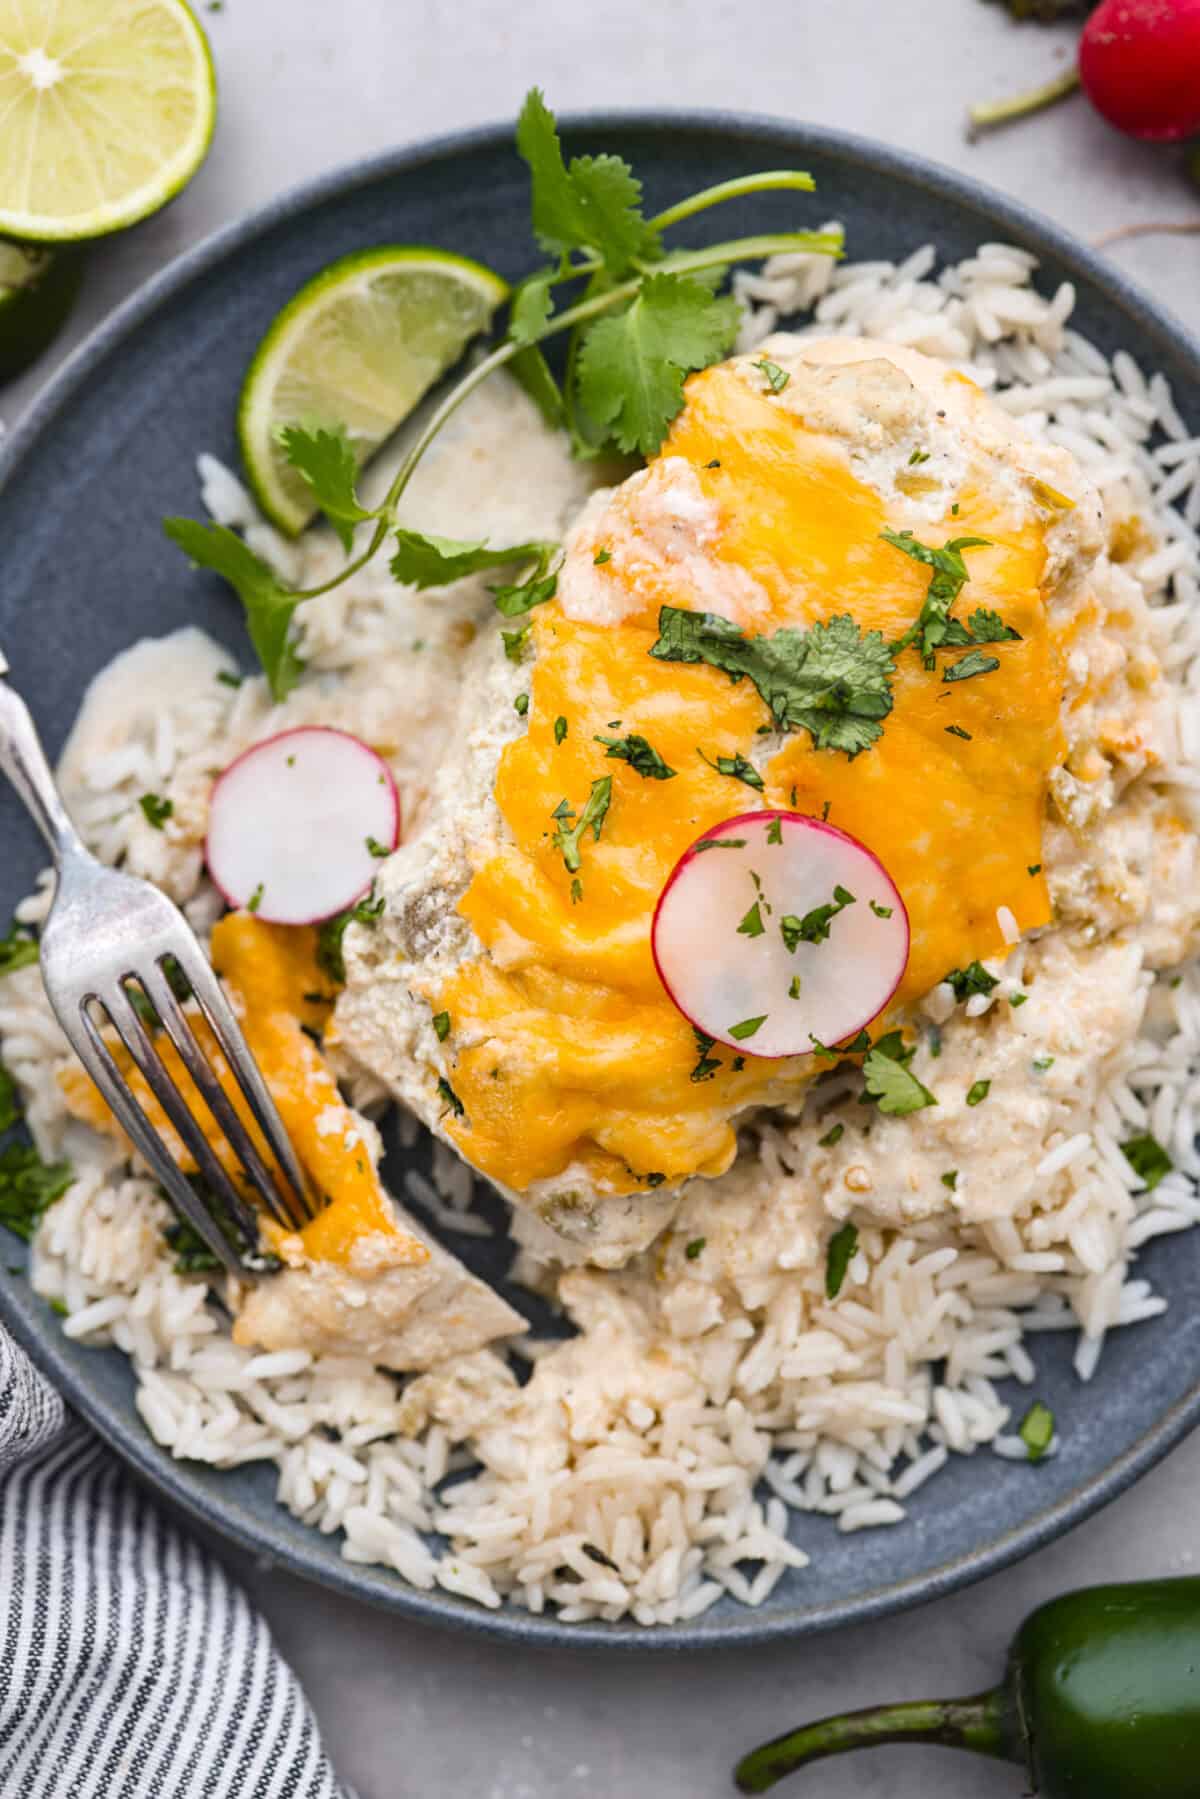 Green chile chicken served over a bed of rice.